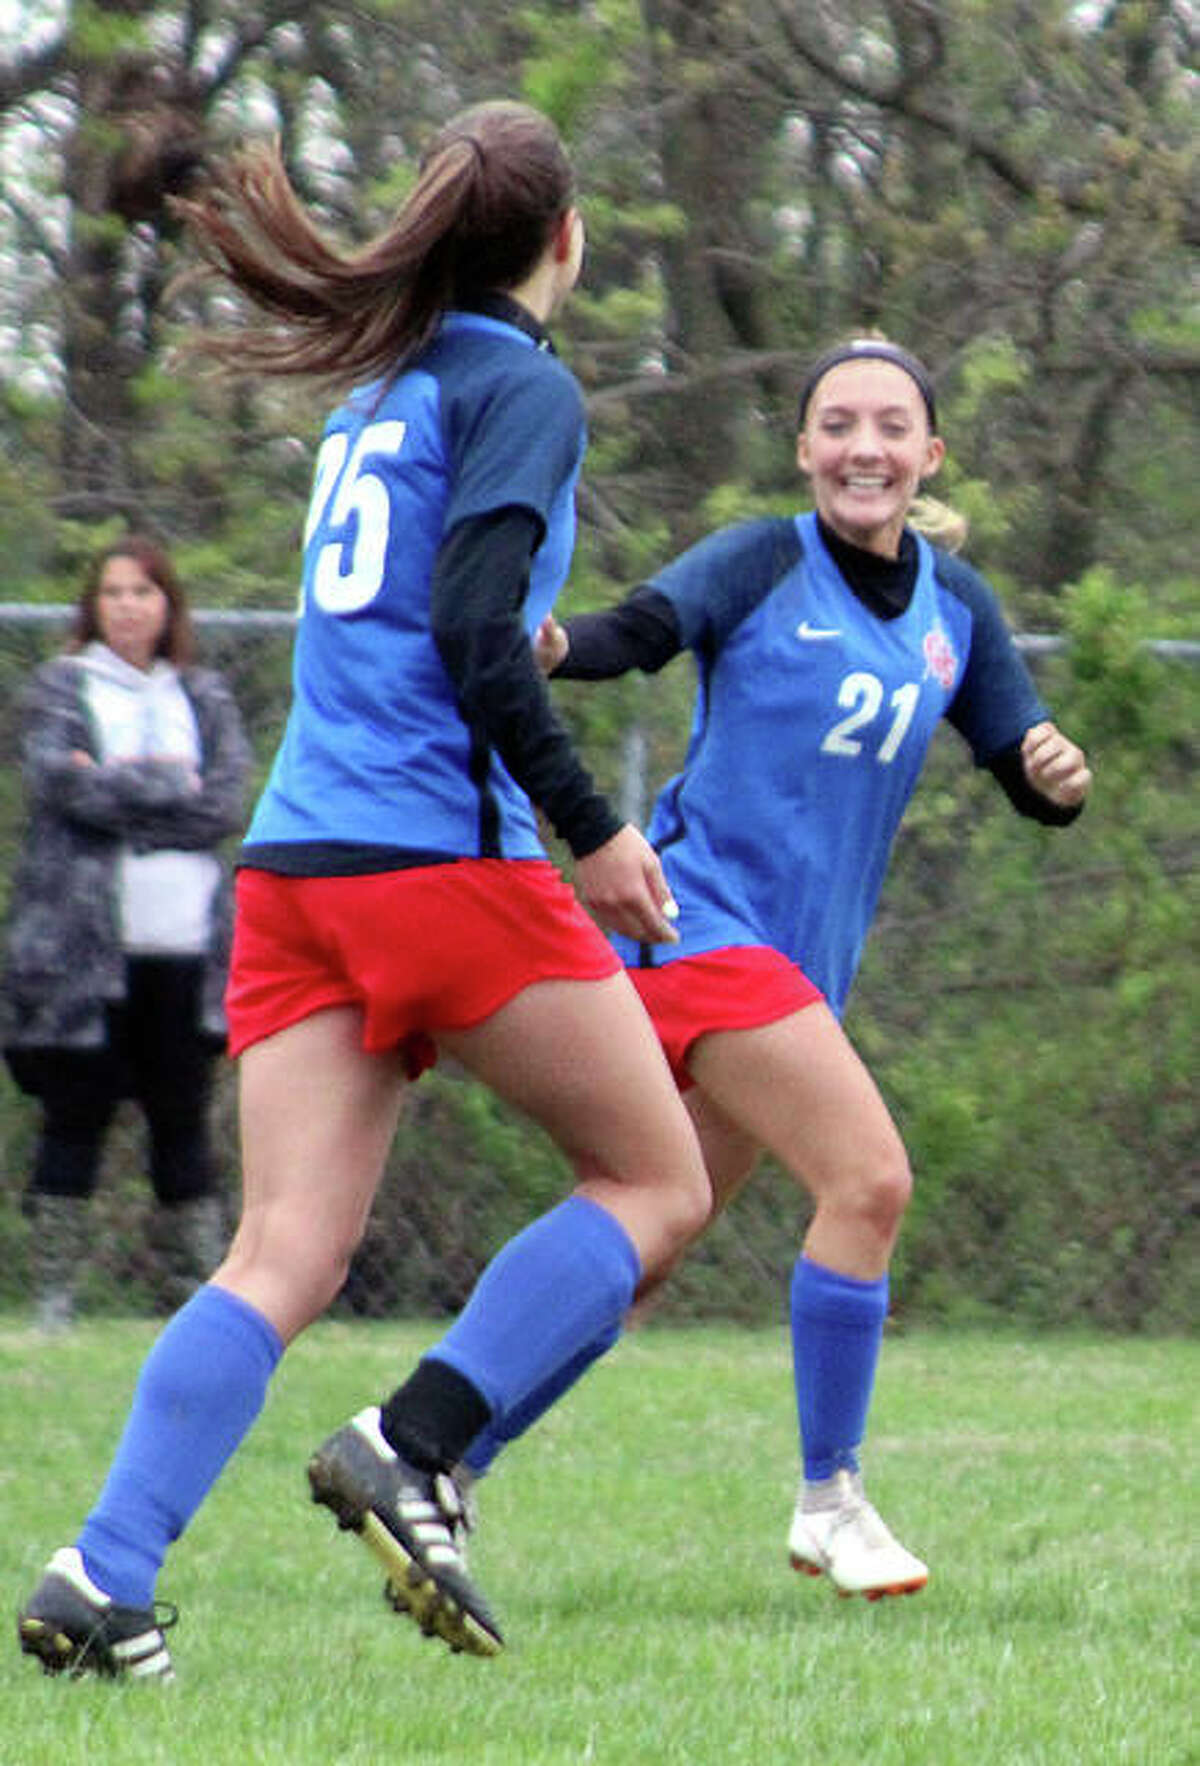 Gabby Marchirori (25) is congratulated by Carlinville teammate Skylar Nickel after scoring a goal in the first half Thursday against Roxana in Carlinville.